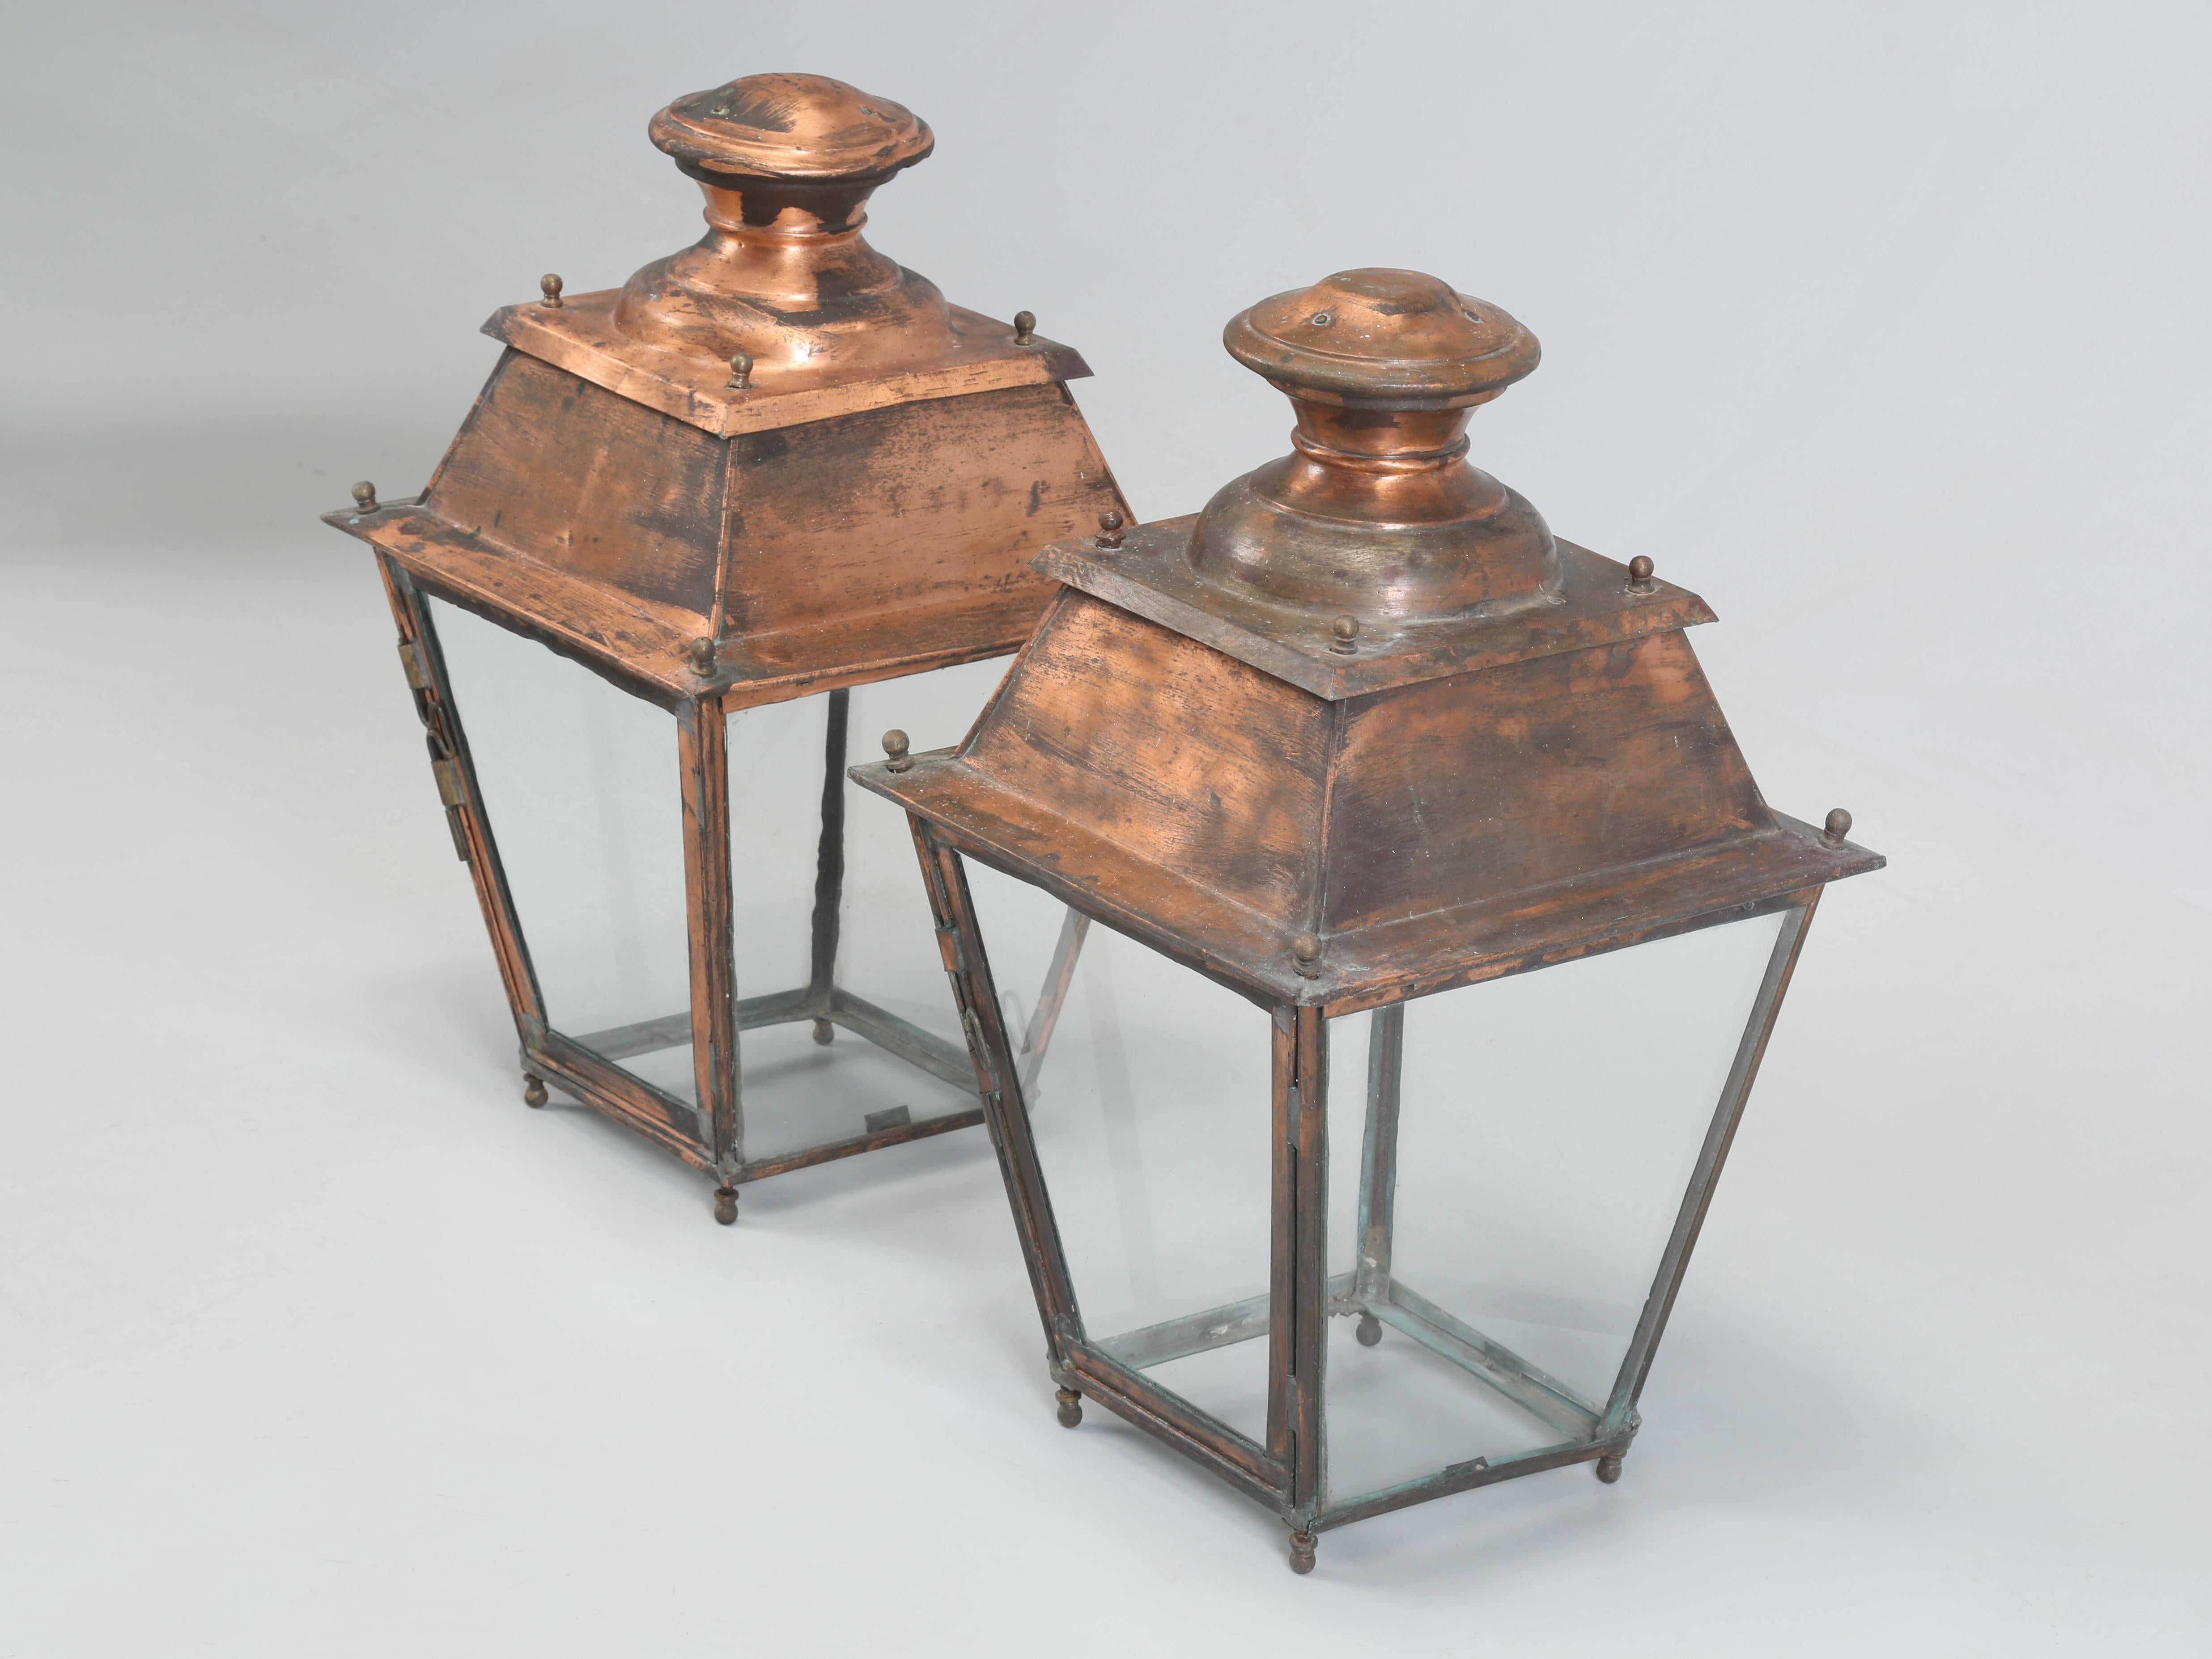 Pair of French Copper Vintage Lanterns that have not been restored or rewired. This pair of Vintage Copper French Lanterns just arrived from Toulouse and our workshop is so far behind in the restoration department, that we thought we might offer